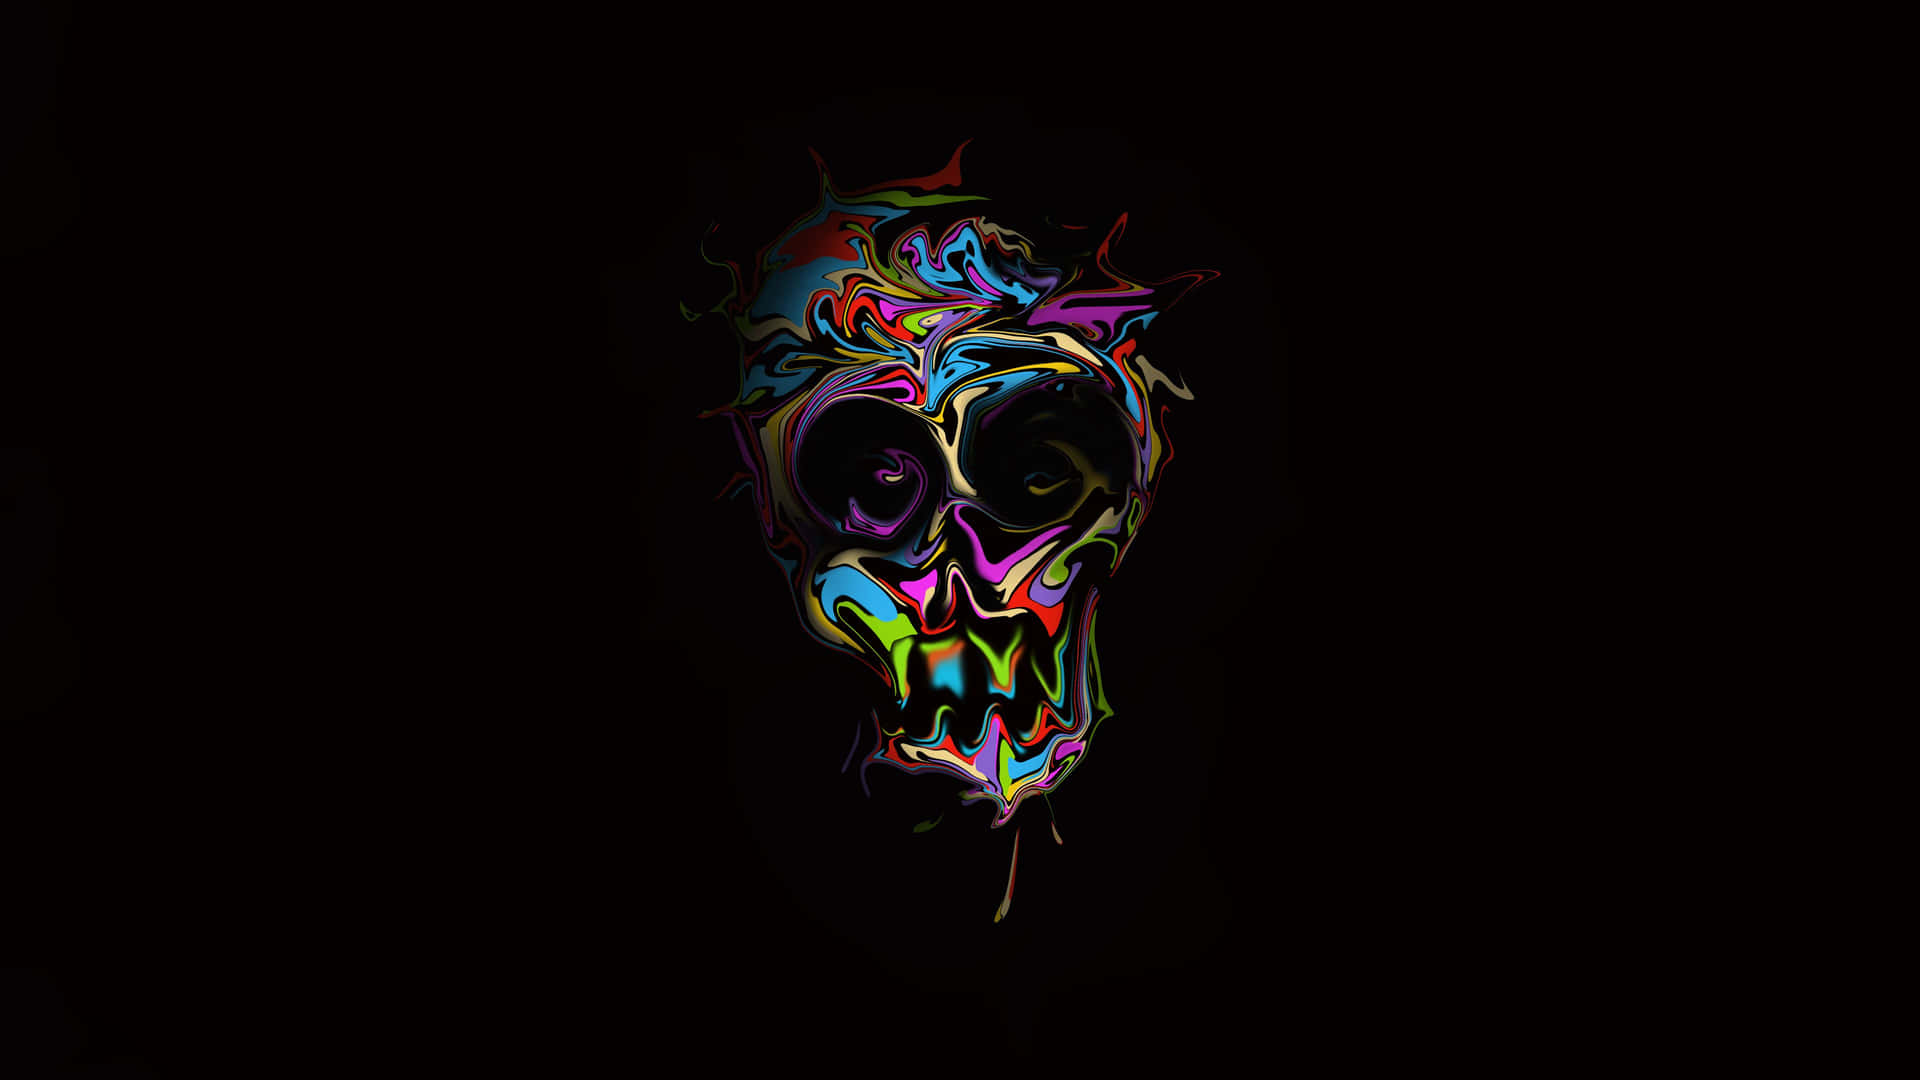 Check out this terrifyingly awesome skull! Wallpaper